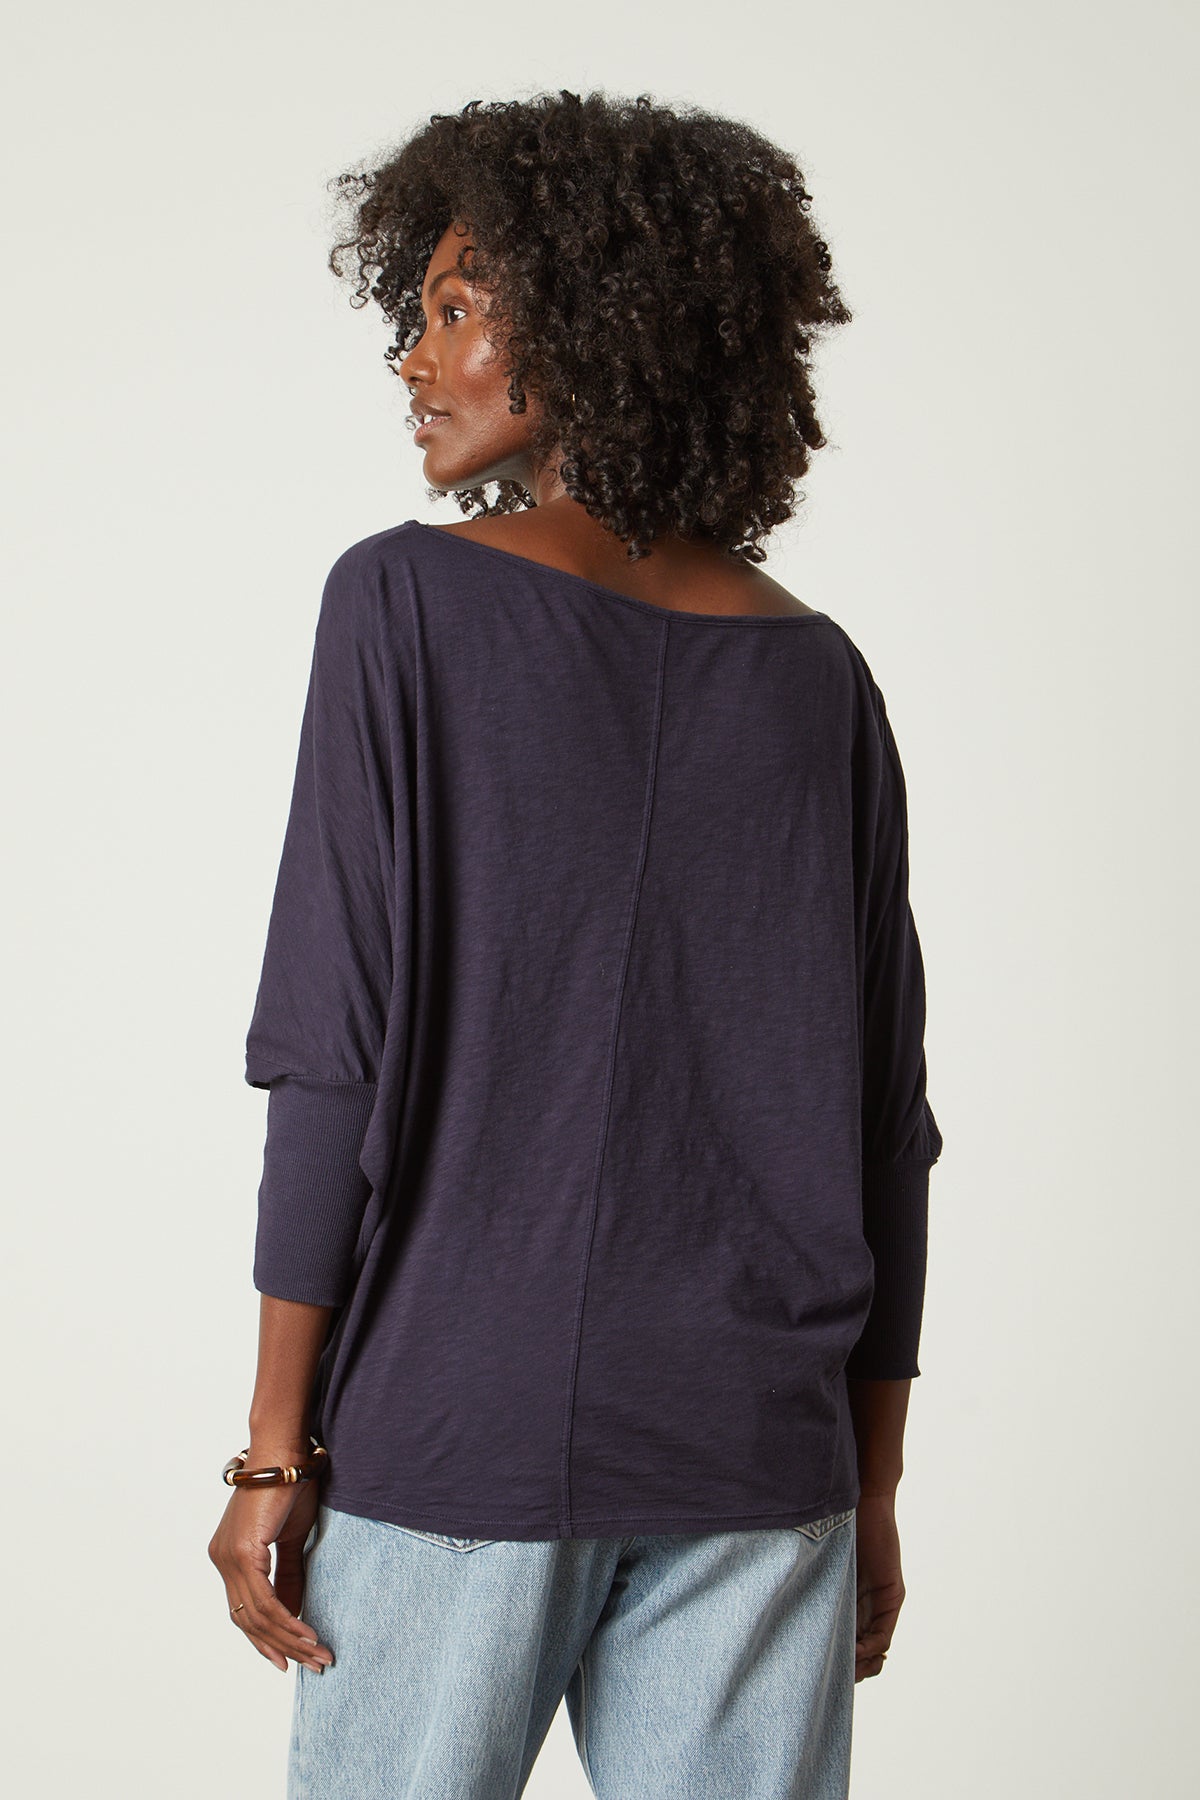 the back view of a woman wearing JOSS DOLMAN SLEEVE TEE by Velvet by Graham & Spencer jeans and a long-sleeved top.-26235745665217